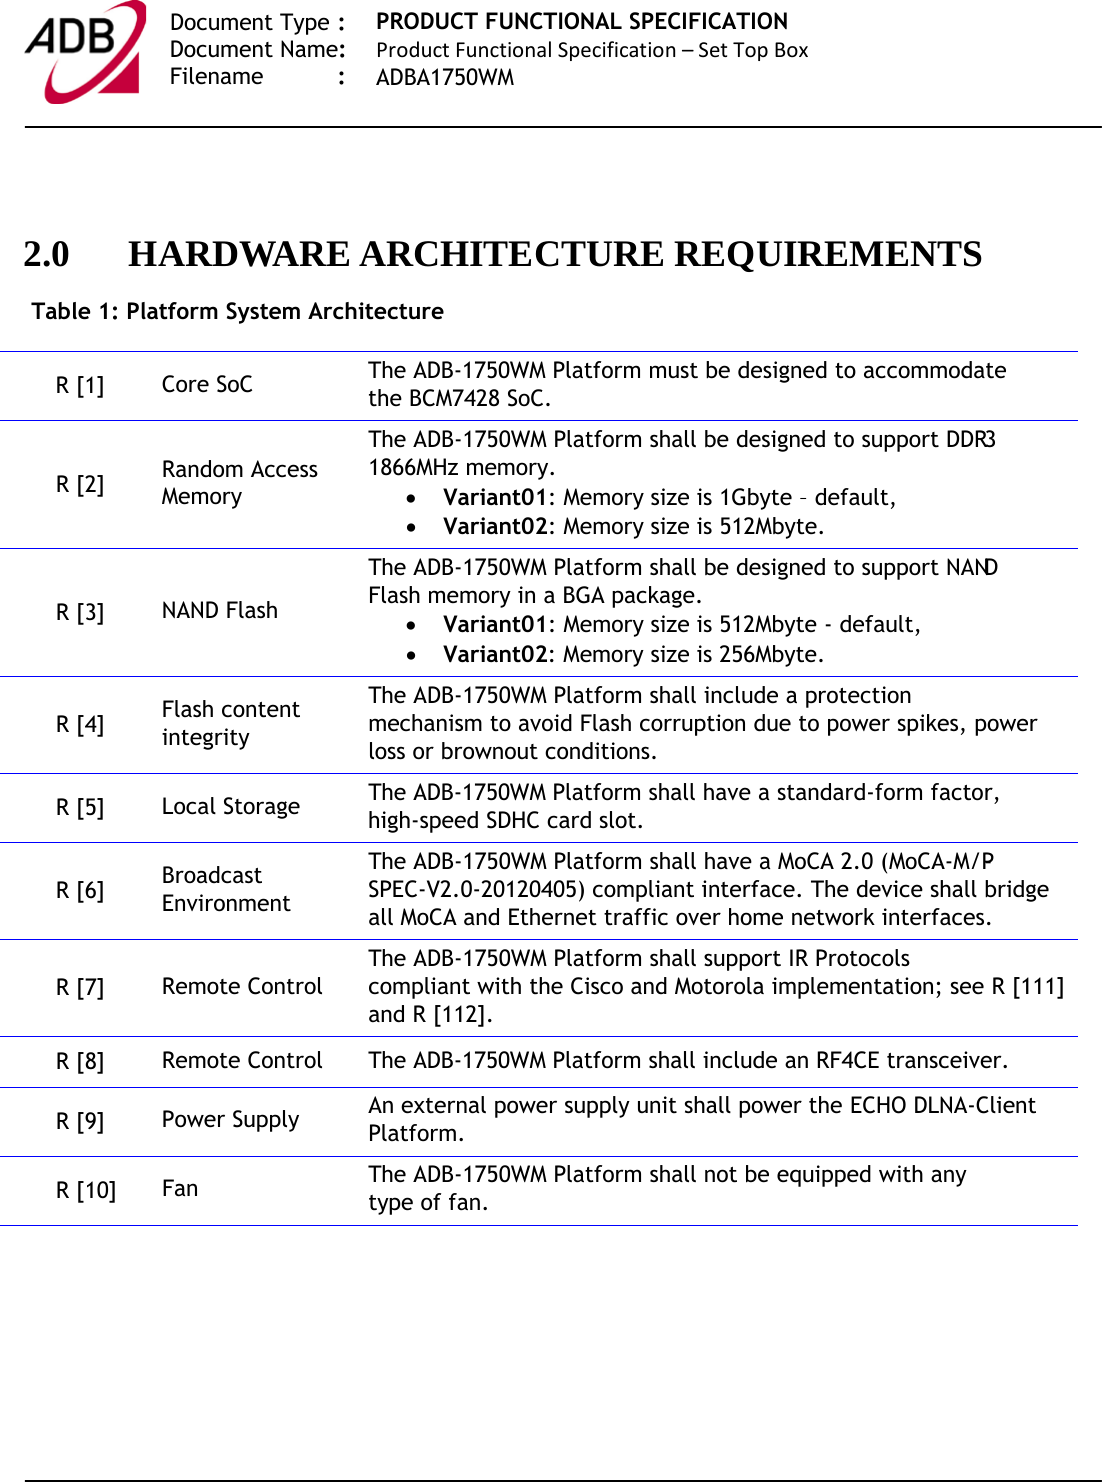   Document Type :  Document Name:  Filename : PRODUCT FUNCTIONAL SPECIFICATION Product Functional Specification – Set Top Box ADBA1750WM     2.0 HARDWARE ARCHITECTURE REQUIREMENTS Table 1: Platform System Architecture R [1]  Core SoC The ADB-1750WM Platform must be designed to accommodate the BCM7428 SoC. R [2]  Random Access Memory The ADB-1750WM Platform shall be designed to support DDR3 1866MHz memory. • Variant01: Memory size is 1Gbyte – default, • Variant02: Memory size is 512Mbyte. R [3]  NAND Flash The ADB-1750WM Platform shall be designed to support NAND Flash memory in a BGA package. • Variant01: Memory size is 512Mbyte - default, • Variant02: Memory size is 256Mbyte. R [4]  Flash content integrity The ADB-1750WM Platform shall include a protection mechanism to avoid Flash corruption due to power spikes, power loss or brownout conditions. R [5]  Local Storage The ADB-1750WM Platform shall have a standard-form factor, high-speed SDHC card slot. R [6]  Broadcast Environment The ADB-1750WM Platform shall have a MoCA 2.0 (MoCA-M/P-SPEC-V2.0-20120405) compliant interface. The device shall bridge all MoCA and Ethernet traffic over home network interfaces. R [7]  Remote Control The ADB-1750WM Platform shall support IR Protocols compliant with the Cisco and Motorola implementation; see R [111] and R [112]. R [8]  Remote Control The ADB-1750WM Platform shall include an RF4CE transceiver. R [9]  Power Supply An external power supply unit shall power the ECHO DLNA-Client Platform. R [10]  Fan The ADB-1750WM Platform shall not be equipped with any type of fan.   